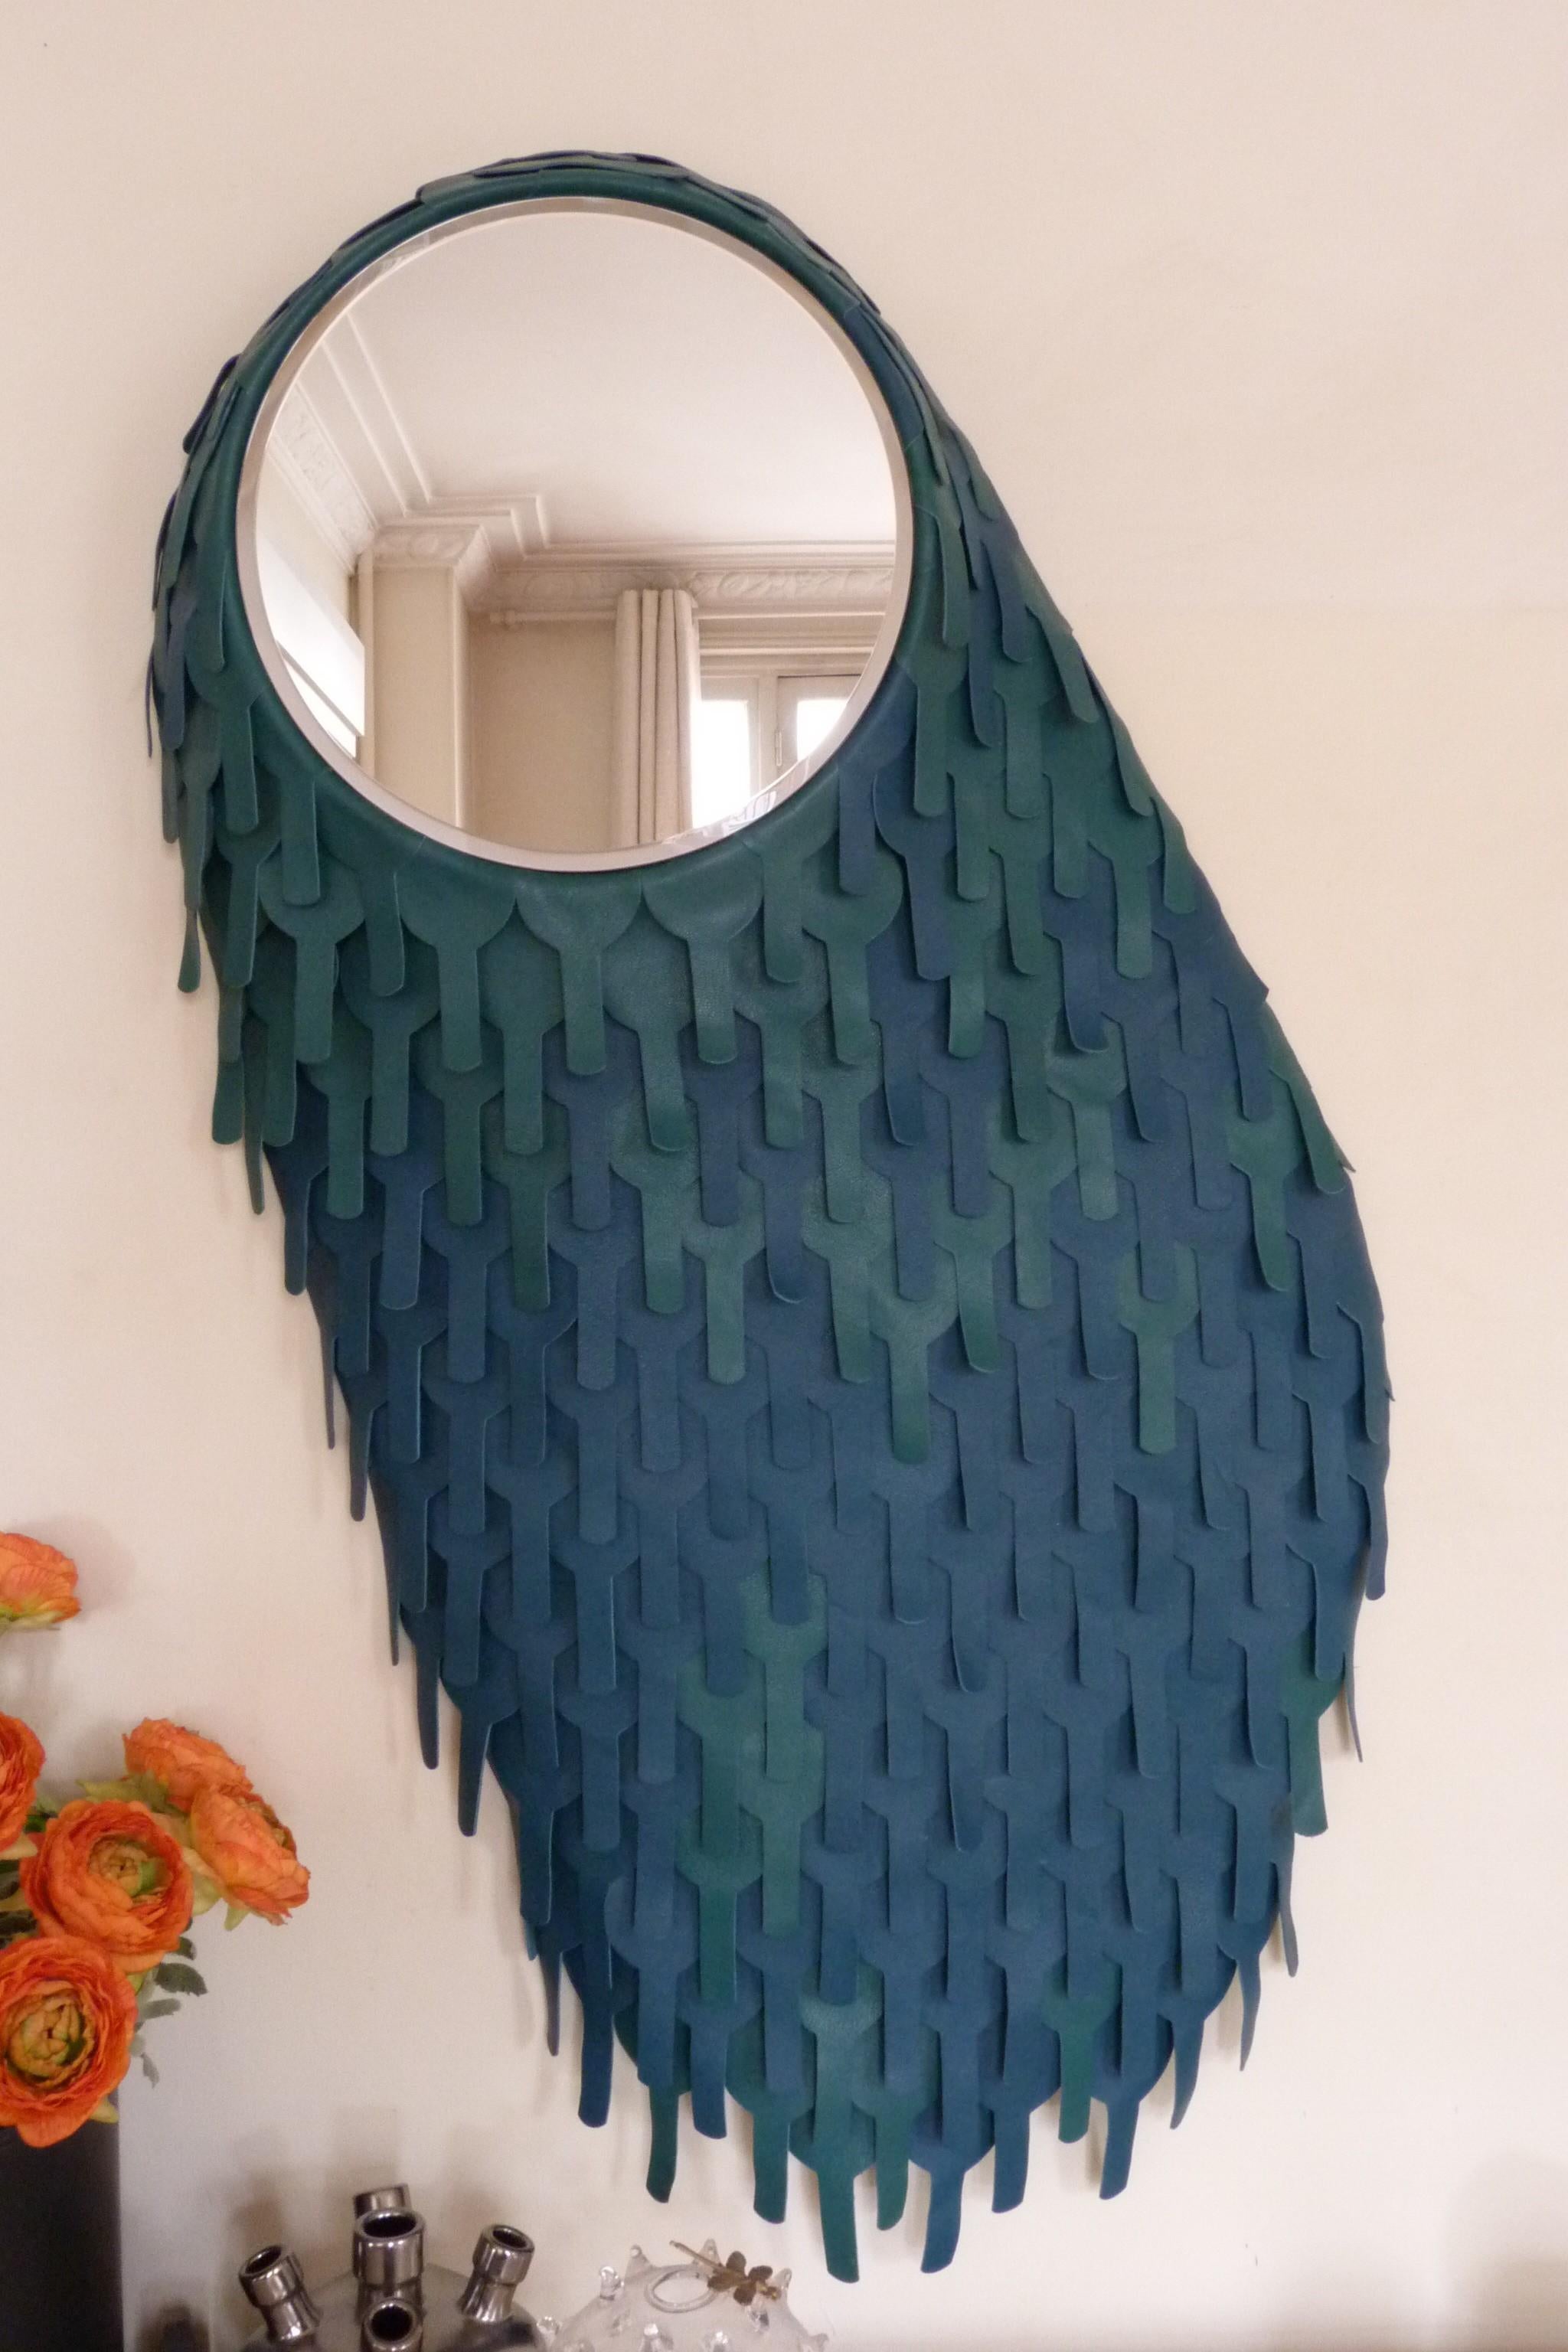 Appliqué One of a Kind Organic Modern Leather Artist’s Mirror, France, 2018